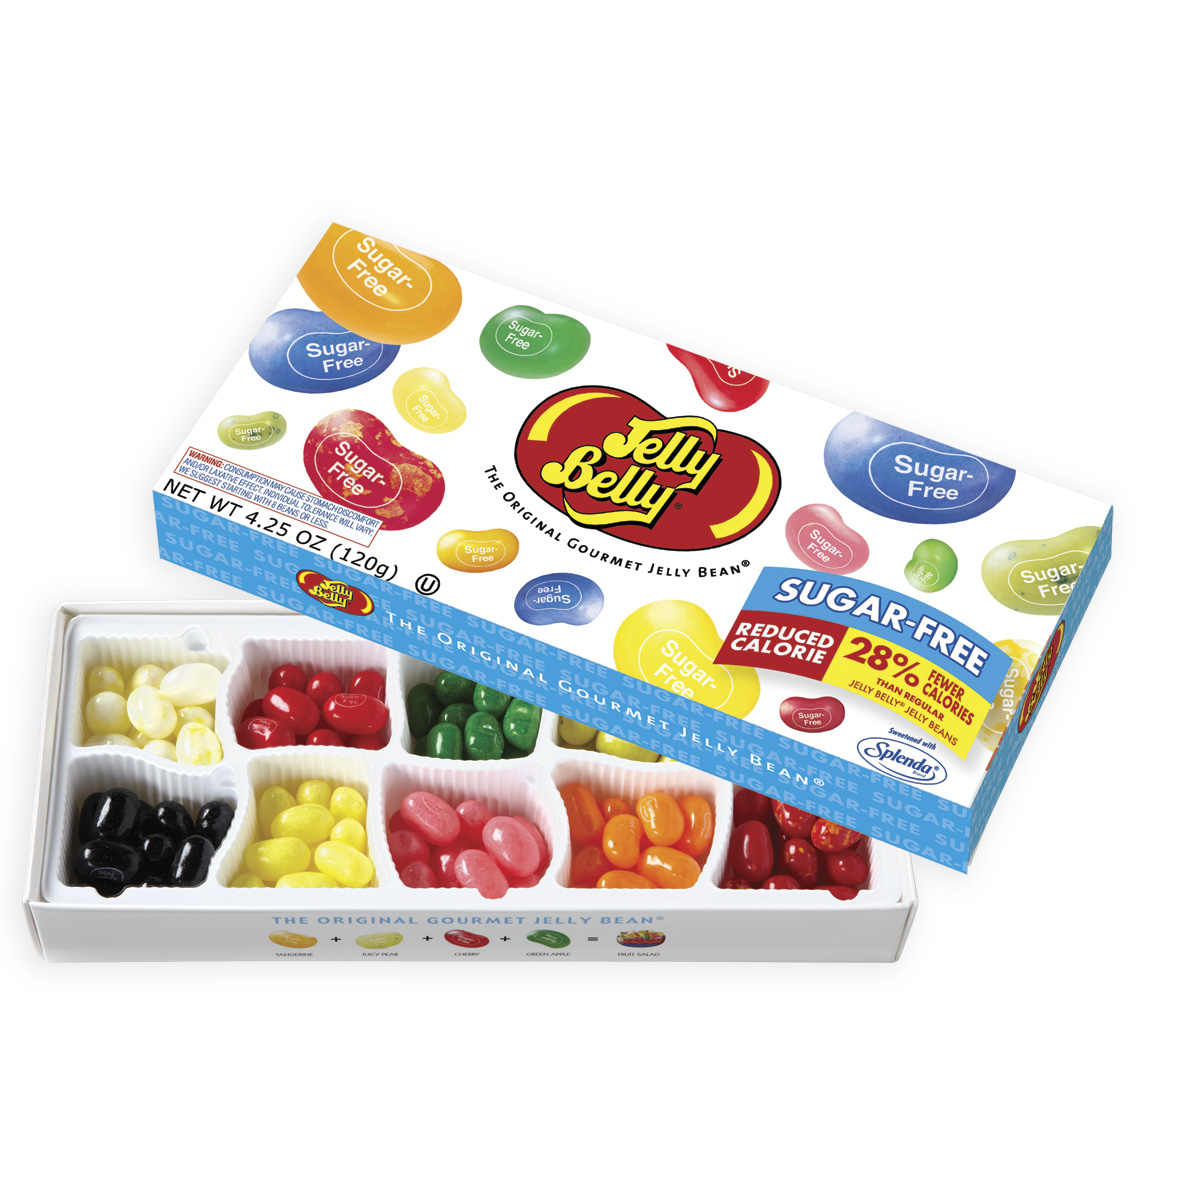 Jelly Belly Sugar-Free jelly beans gift box. 10 flavors like Buttered Popcorn; Sizzling Cinnamon; Very Cherry and more.